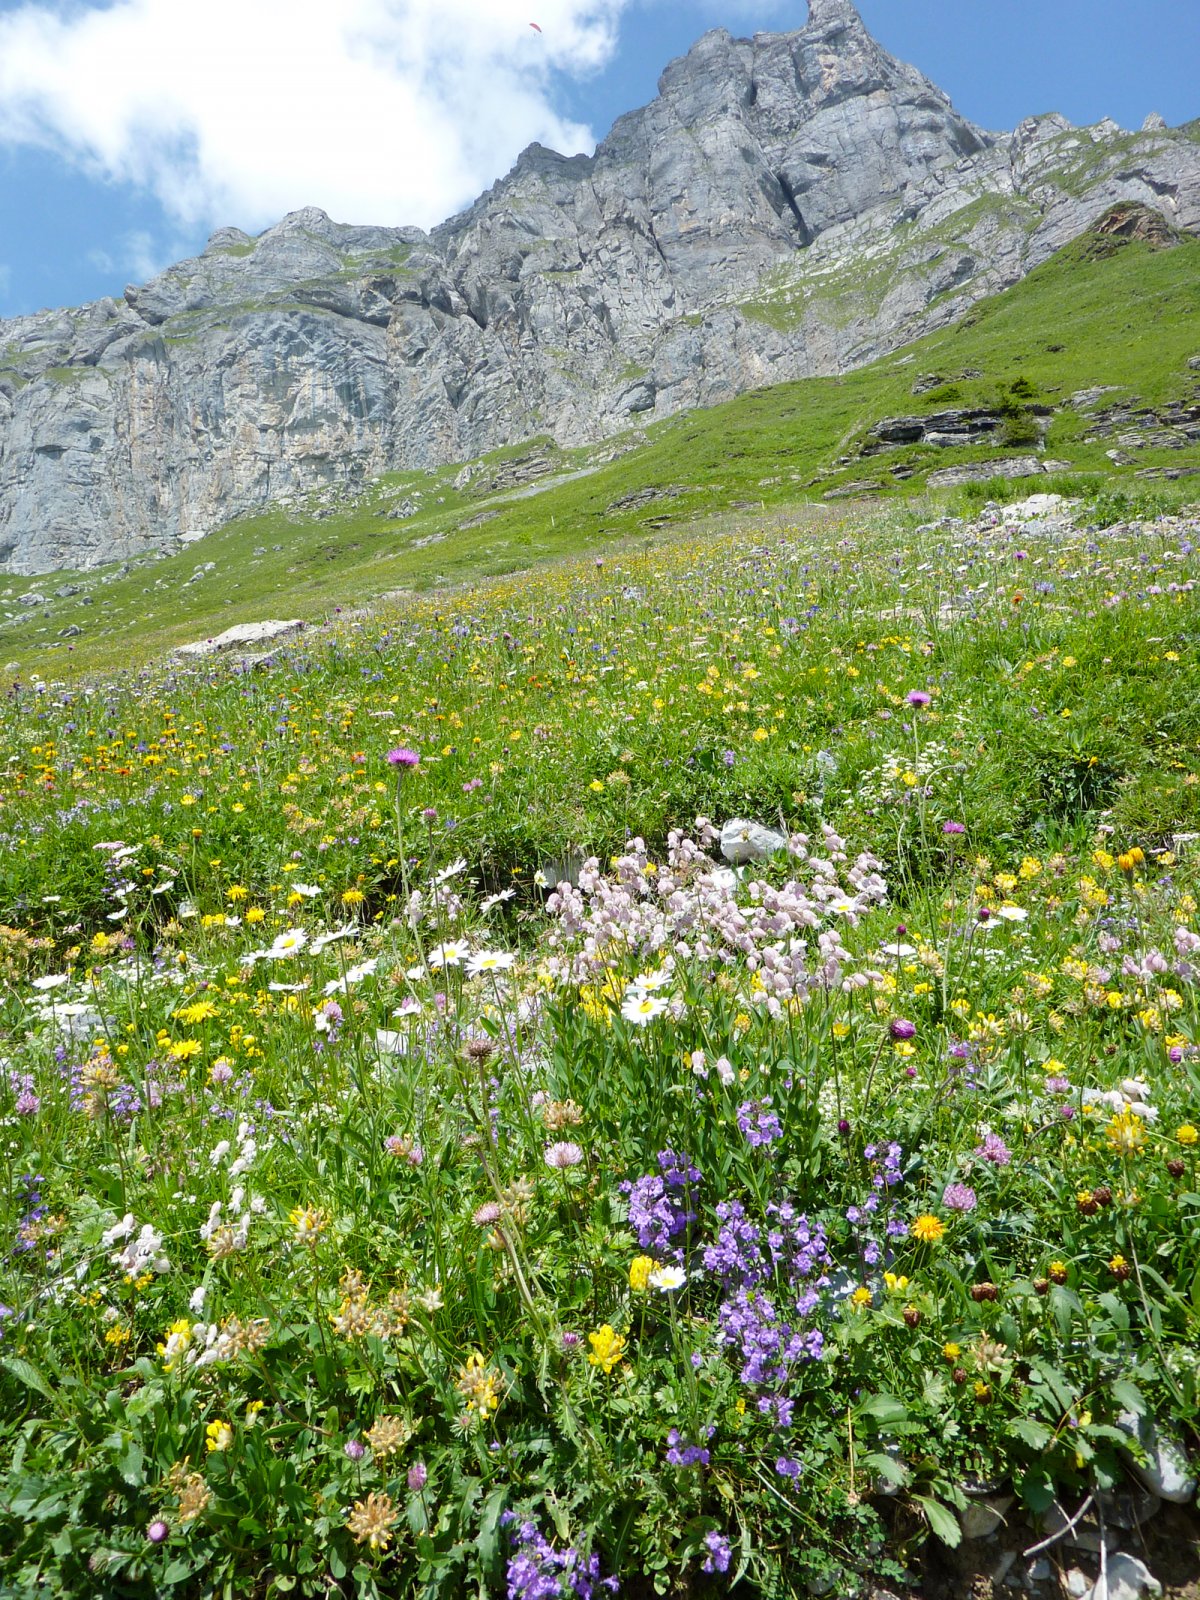 Hiking in Braunwald during Summer